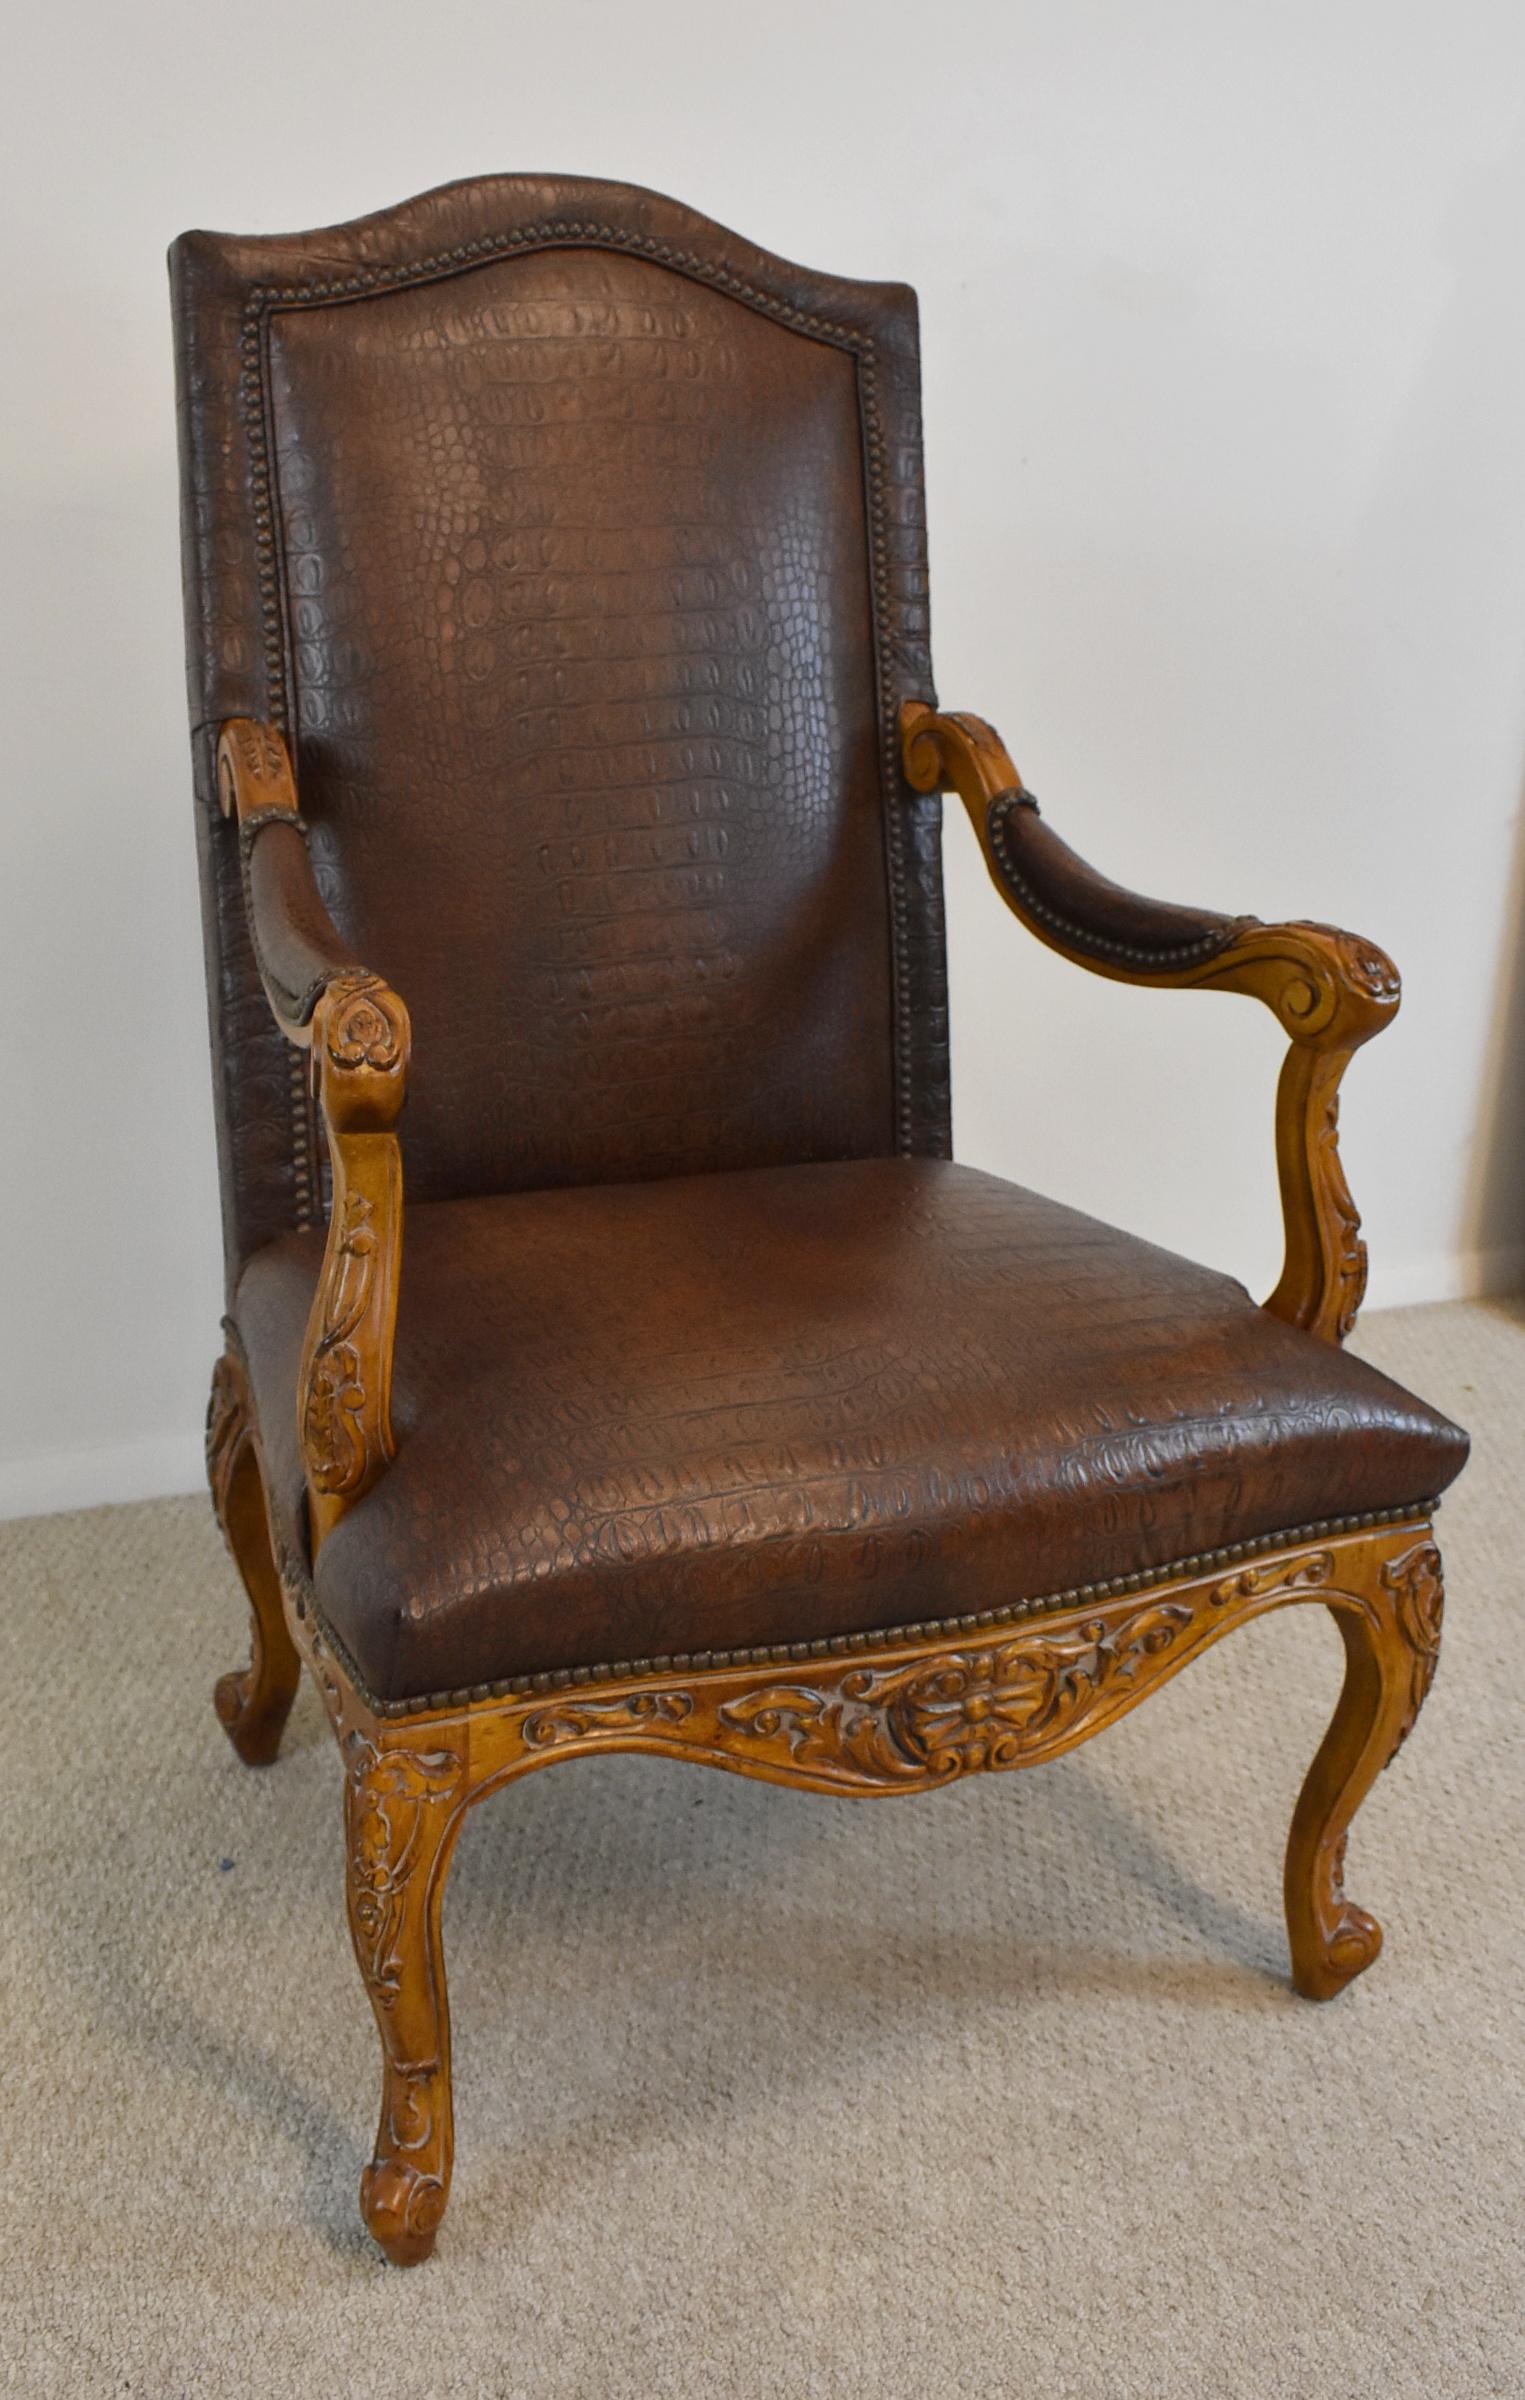 Century Furniture Highbacked Crocodile Embossed Leather Armchair. Circa 21st Century, pre-owned. Premium finish hand carved wooden frame. Brass nail head trim on embossed leather. Excellent condition, some wear is consistent with usage and age.